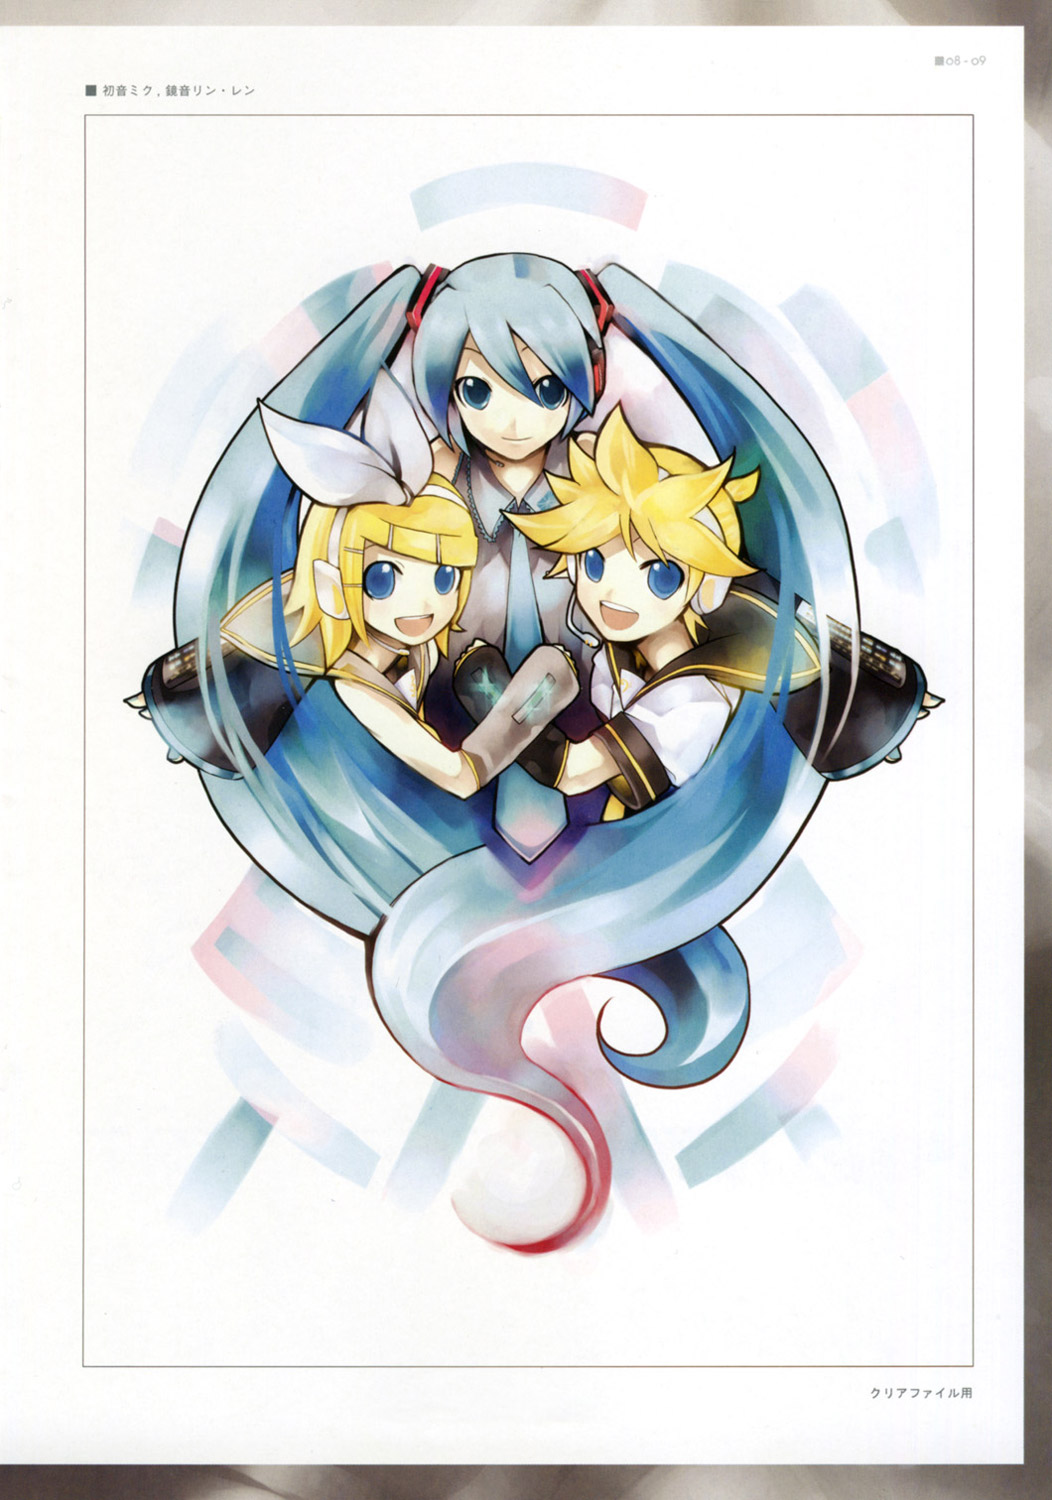 Vocaloid's unofficial illustrations image by Various Artists